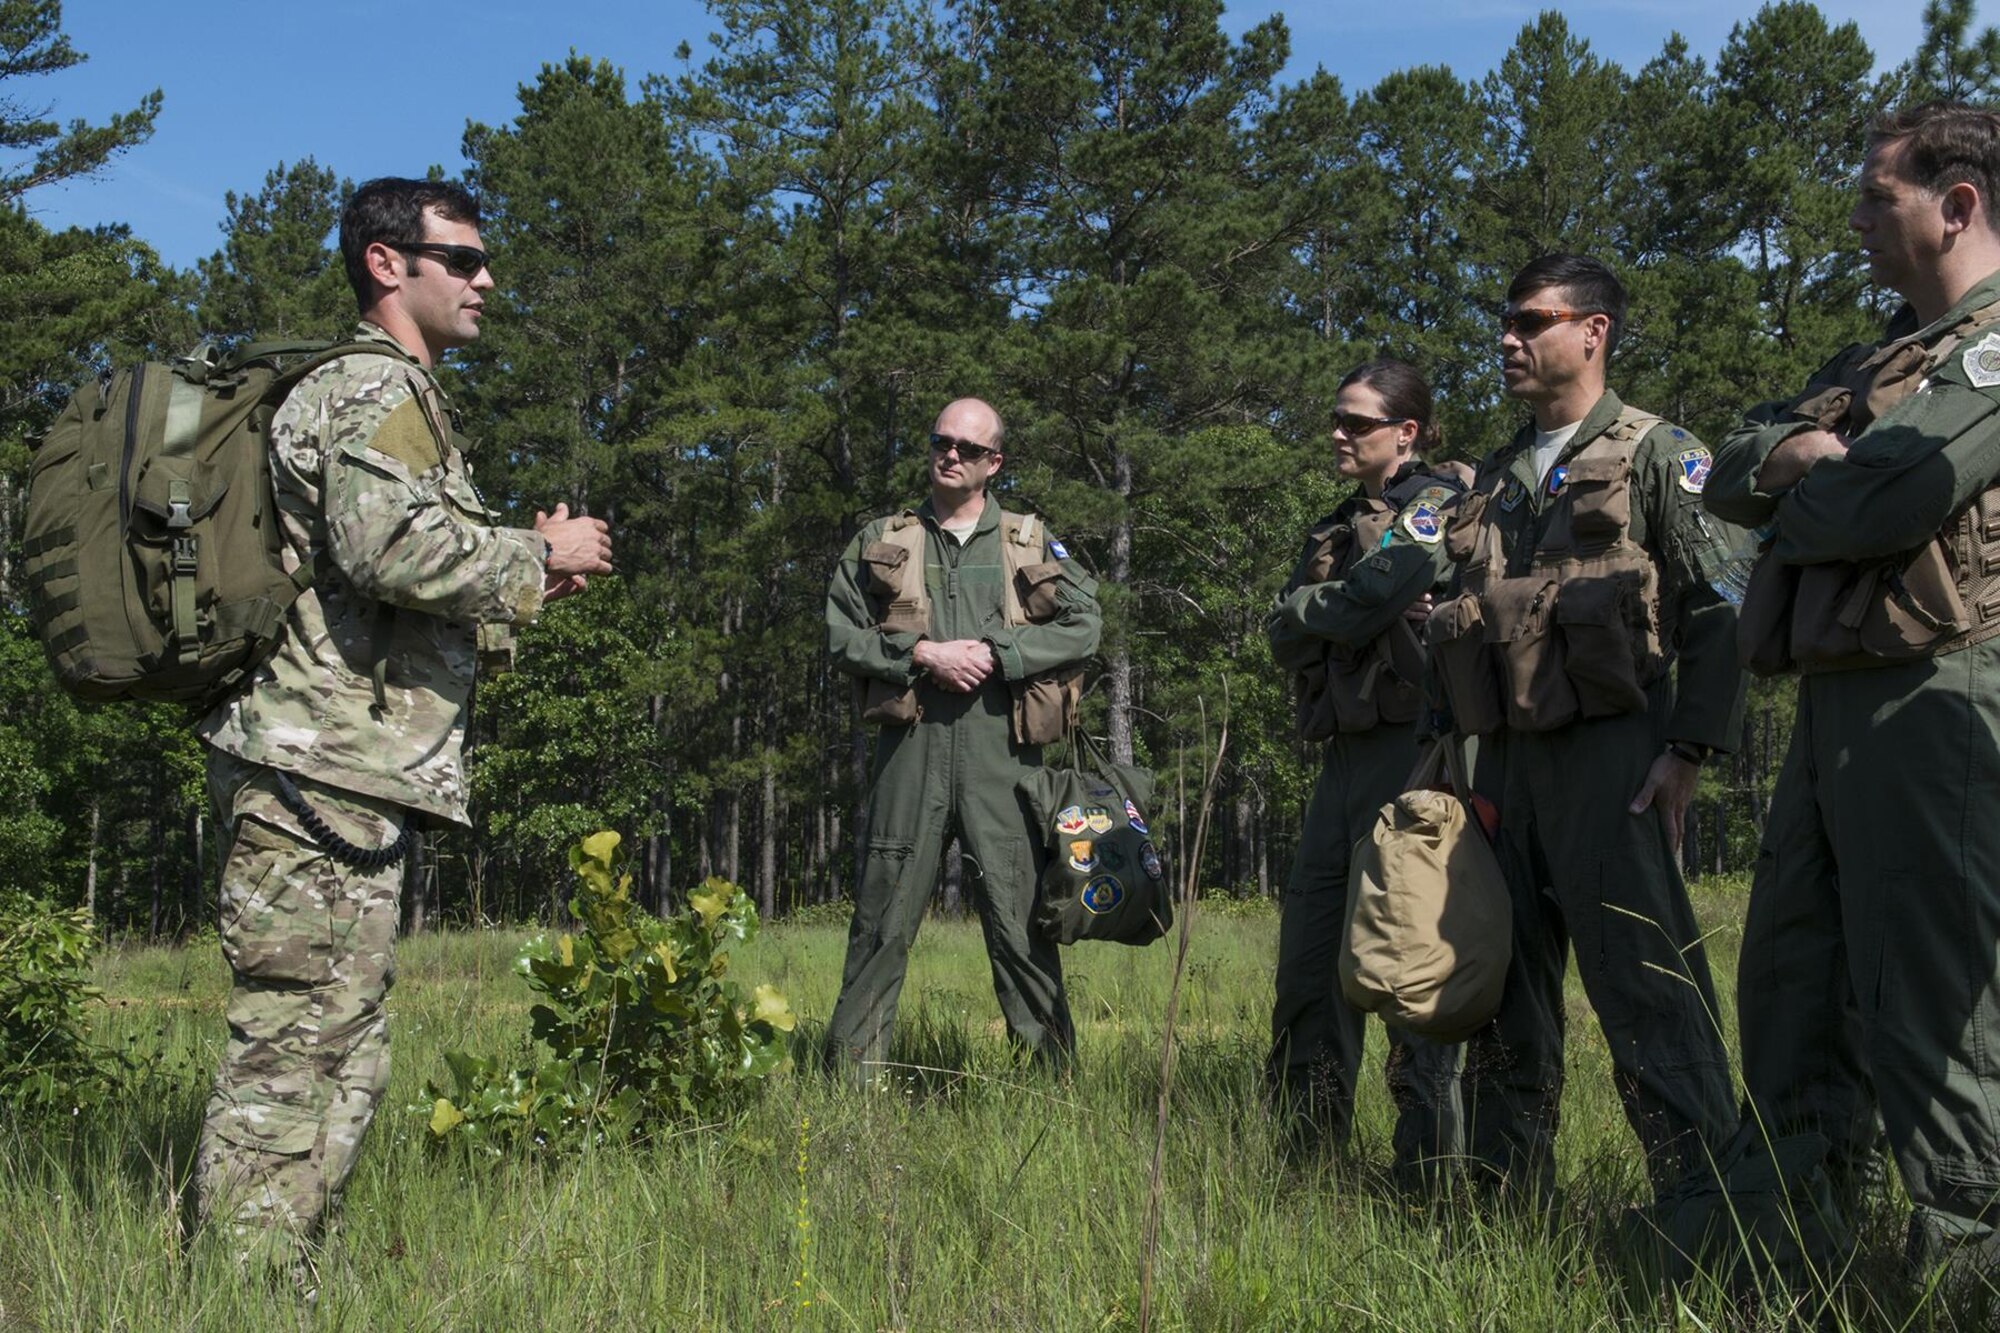 U.S. Air Force Staff Sgt. Matthew Mete, 2nd Operations Support Squadron SERE instructor, briefs a group of 93rd Bomb Squadron aircrew members prior to the start of their training on May 14, 2016, Claiborne Gunnery and Bombing Range, La. SERE, which stands for Survival, Evasion, Resistance and Escape, is required training for all aircrew members and provides the knowledge and tools necessary to survive on their own in any environment and under any condition should they have to abandon their aircraft. (U.S. Air Force photo by Master Sgt. Greg Steele/Released)